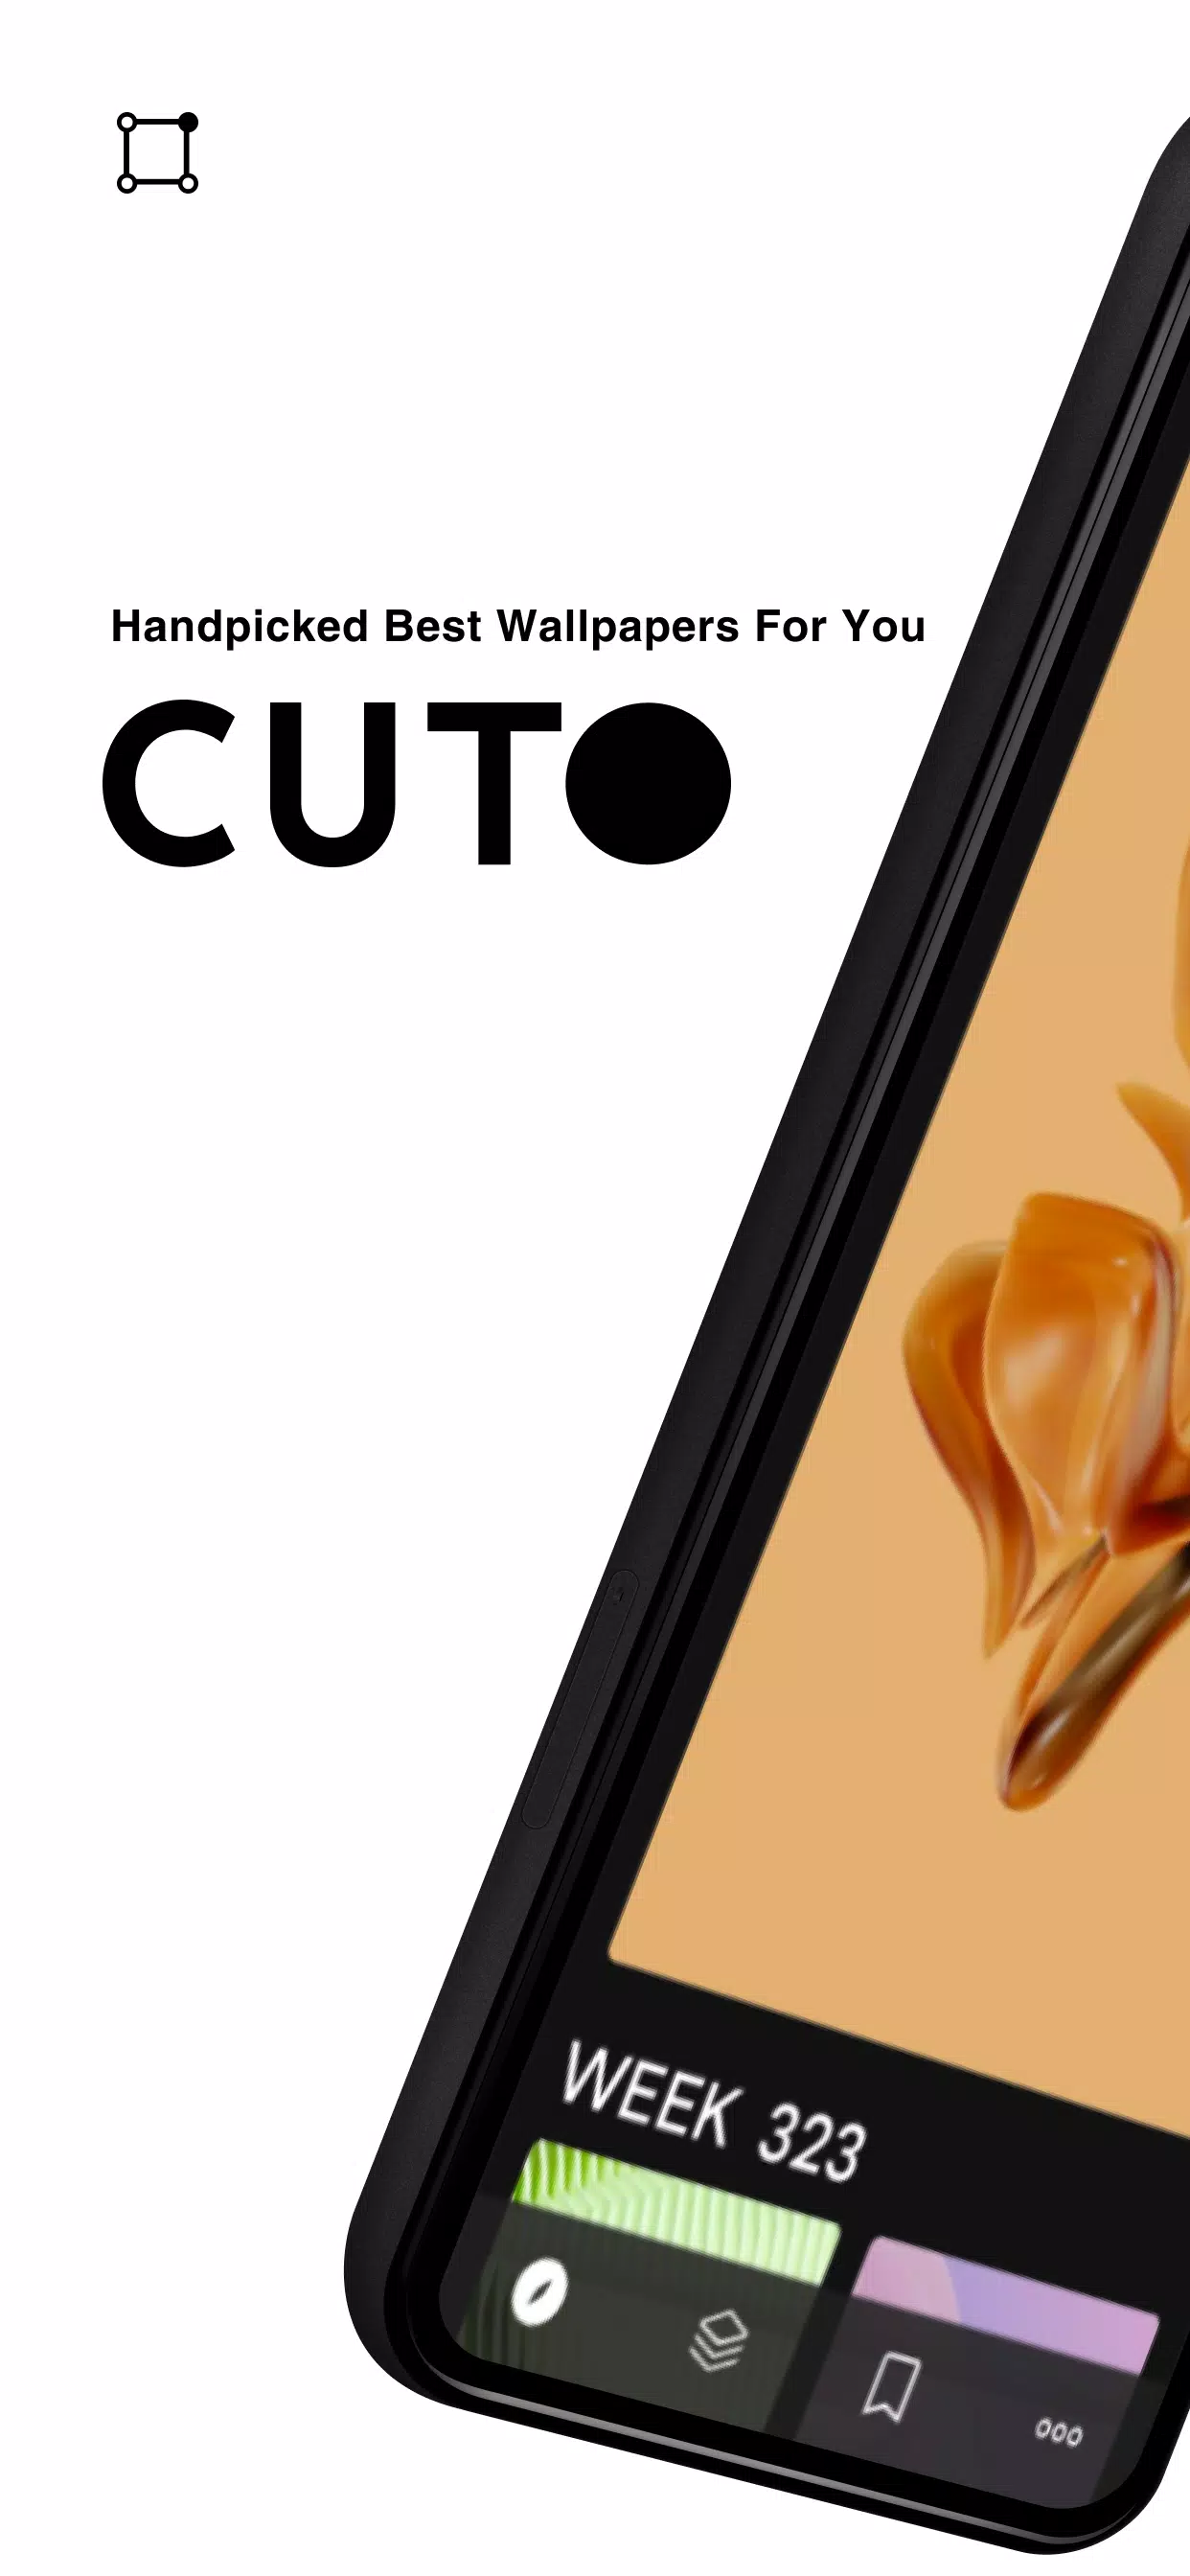 Cuto Apk For Android Download